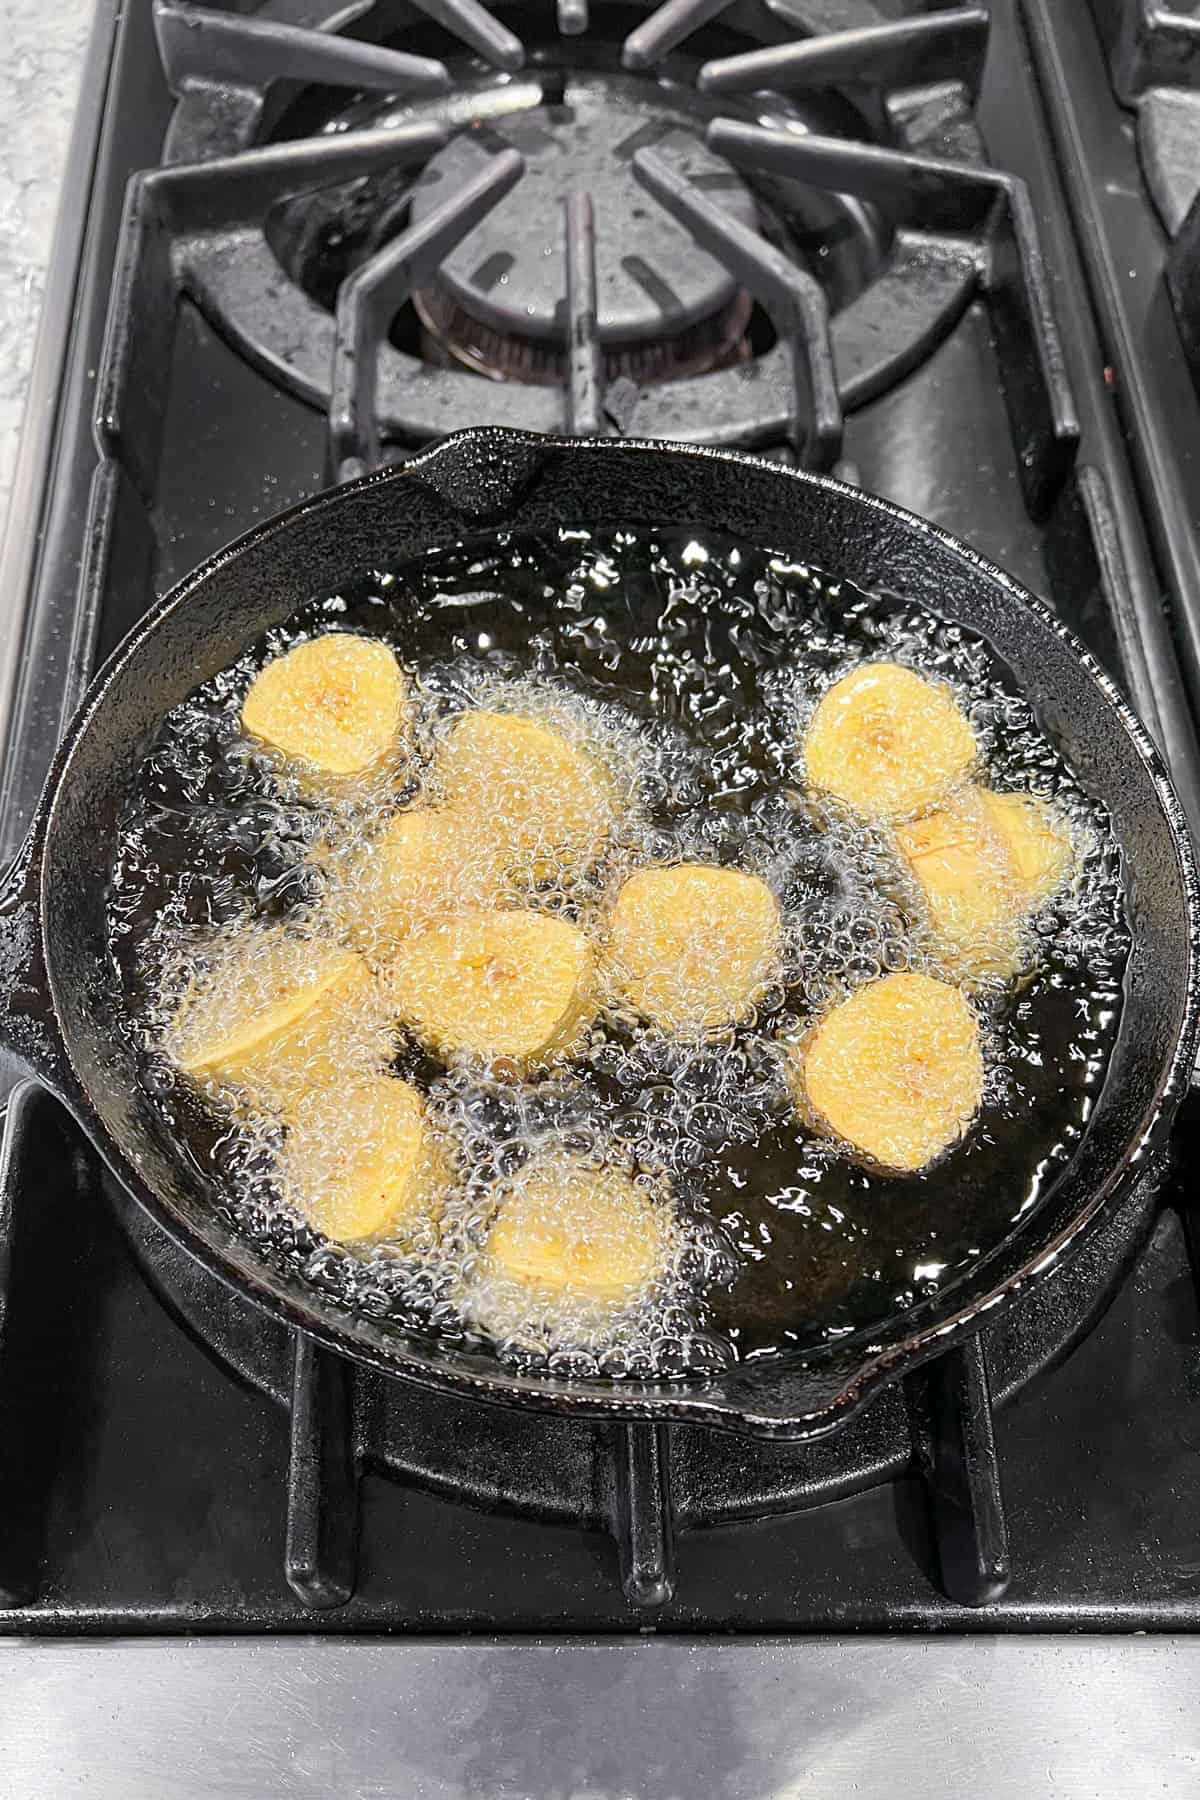 a dozen pieces of sliced green plantain frying in oil in a small cast iron skillet